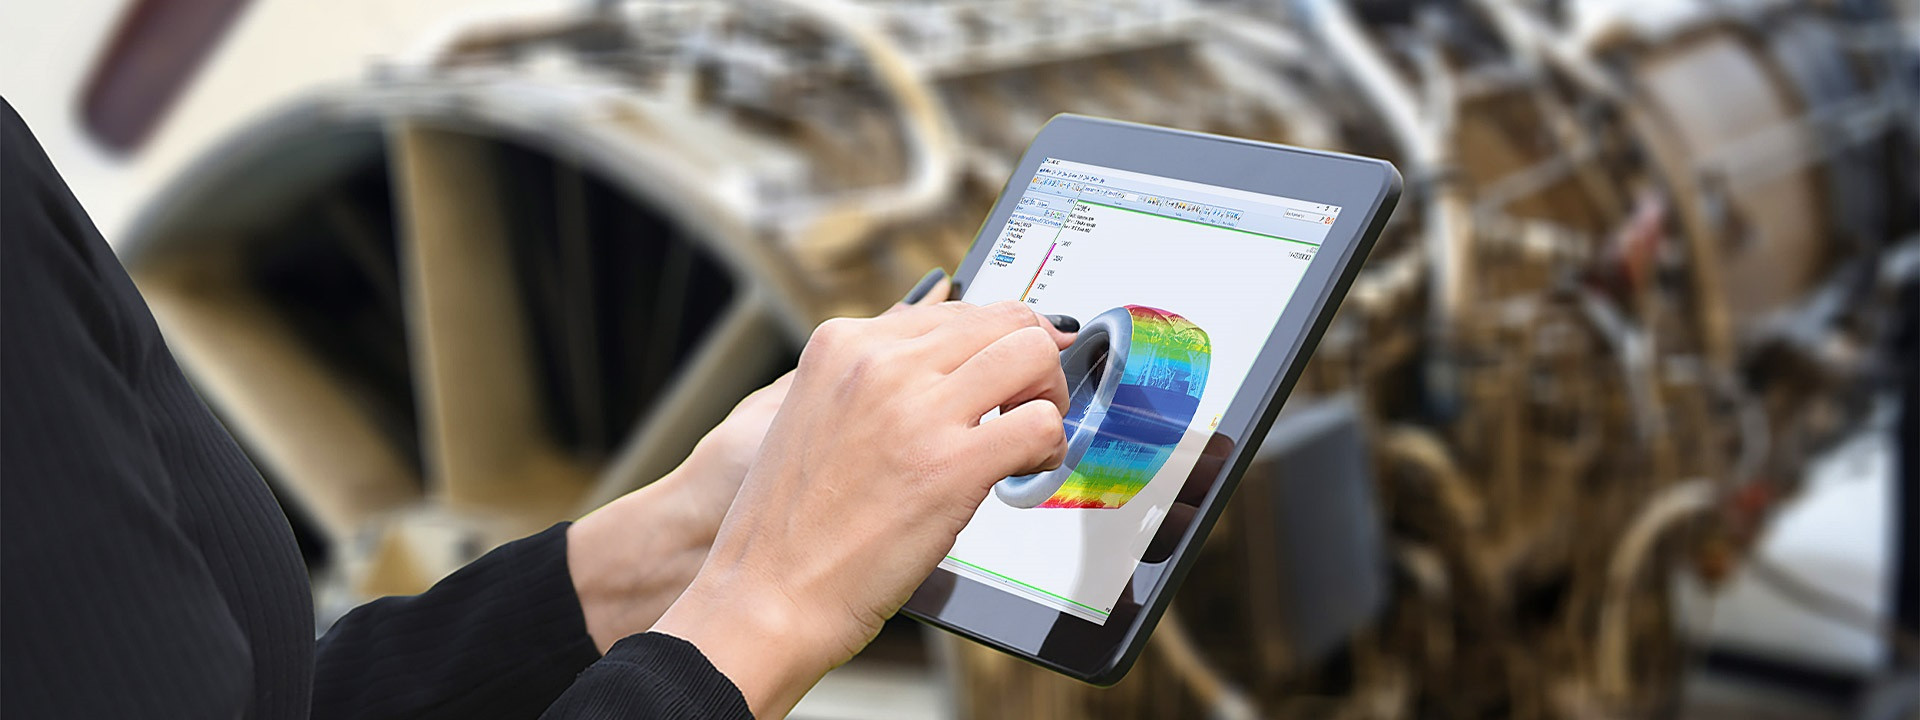 Transforming the Aerospace Industry with Smart Manufacturing and Design  Available On-Demand